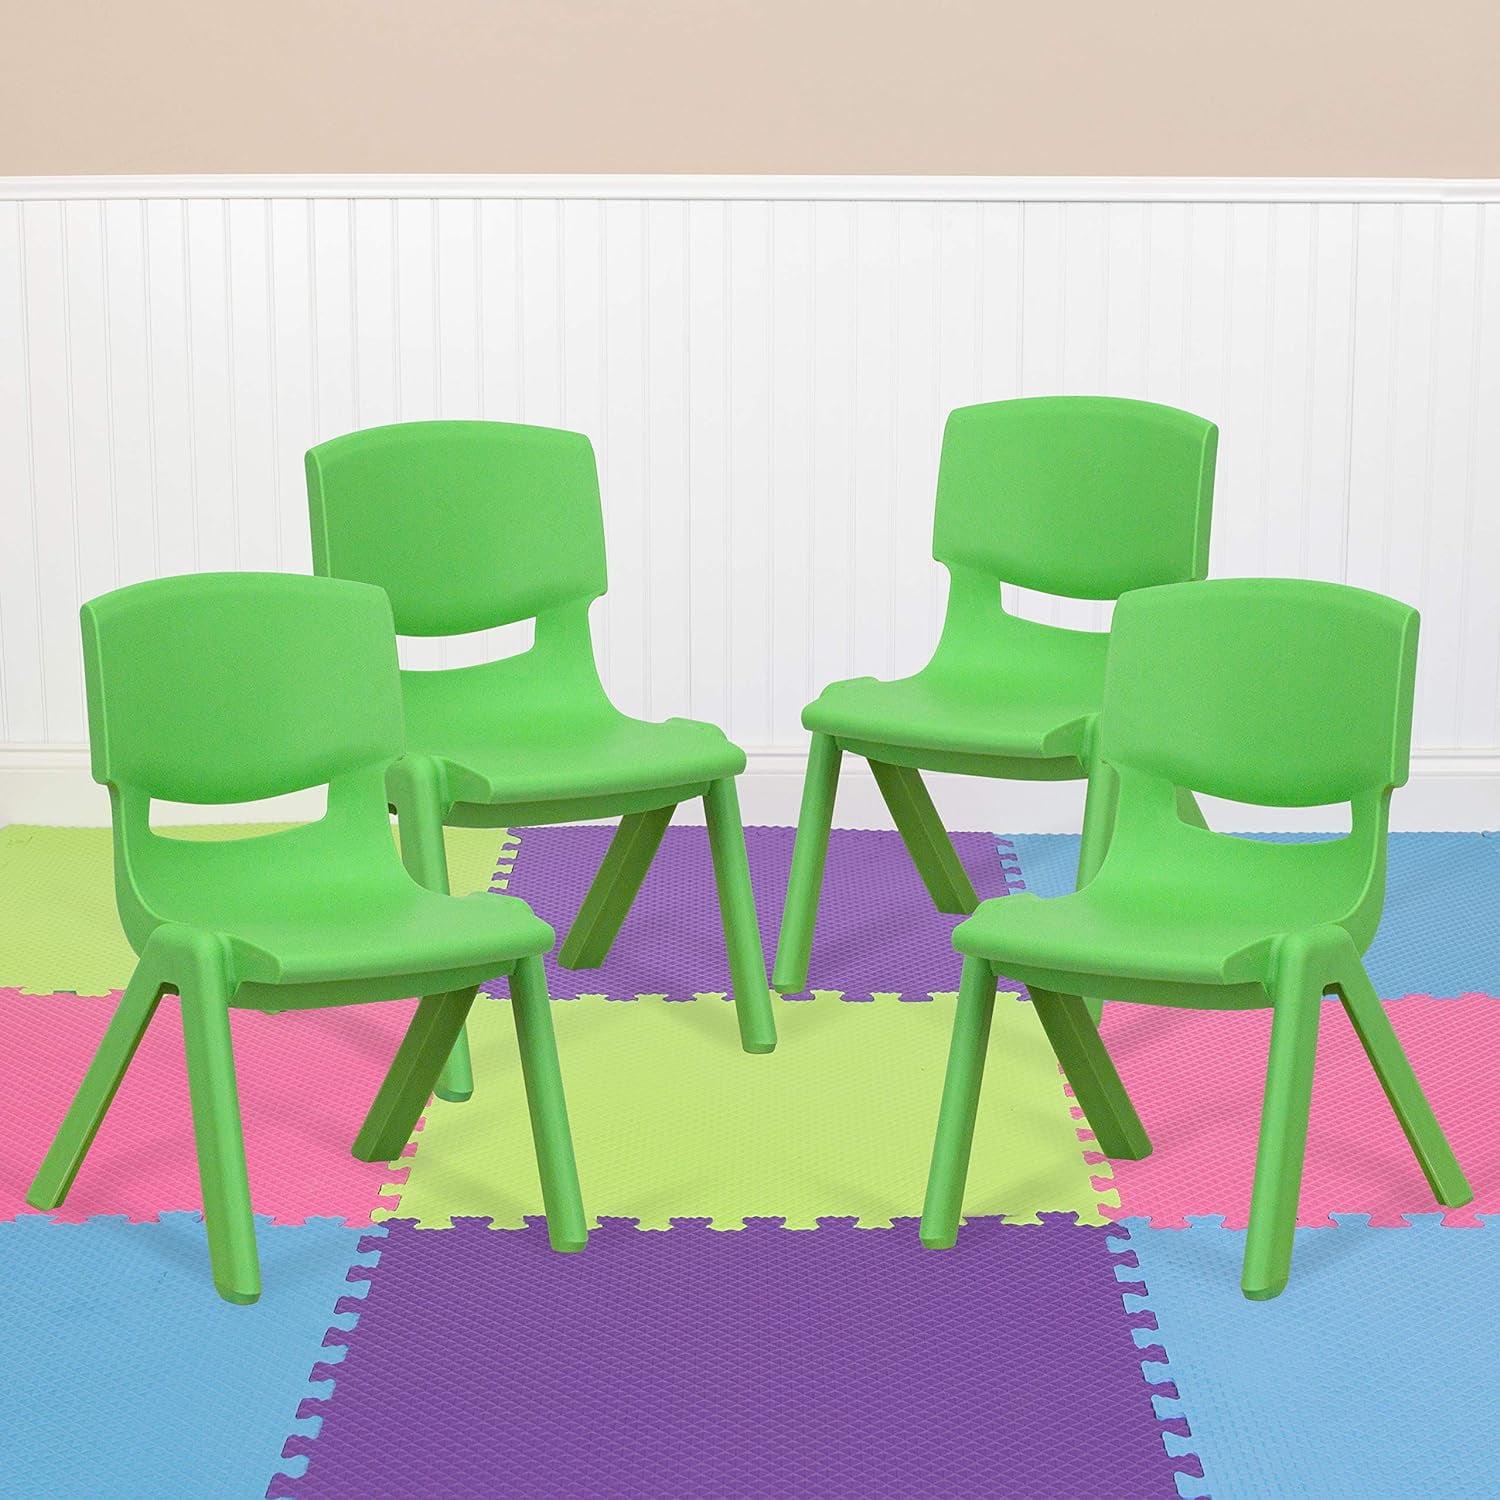 Lively Green Stackable Plastic Preschool Chair, 44"x13"x17"